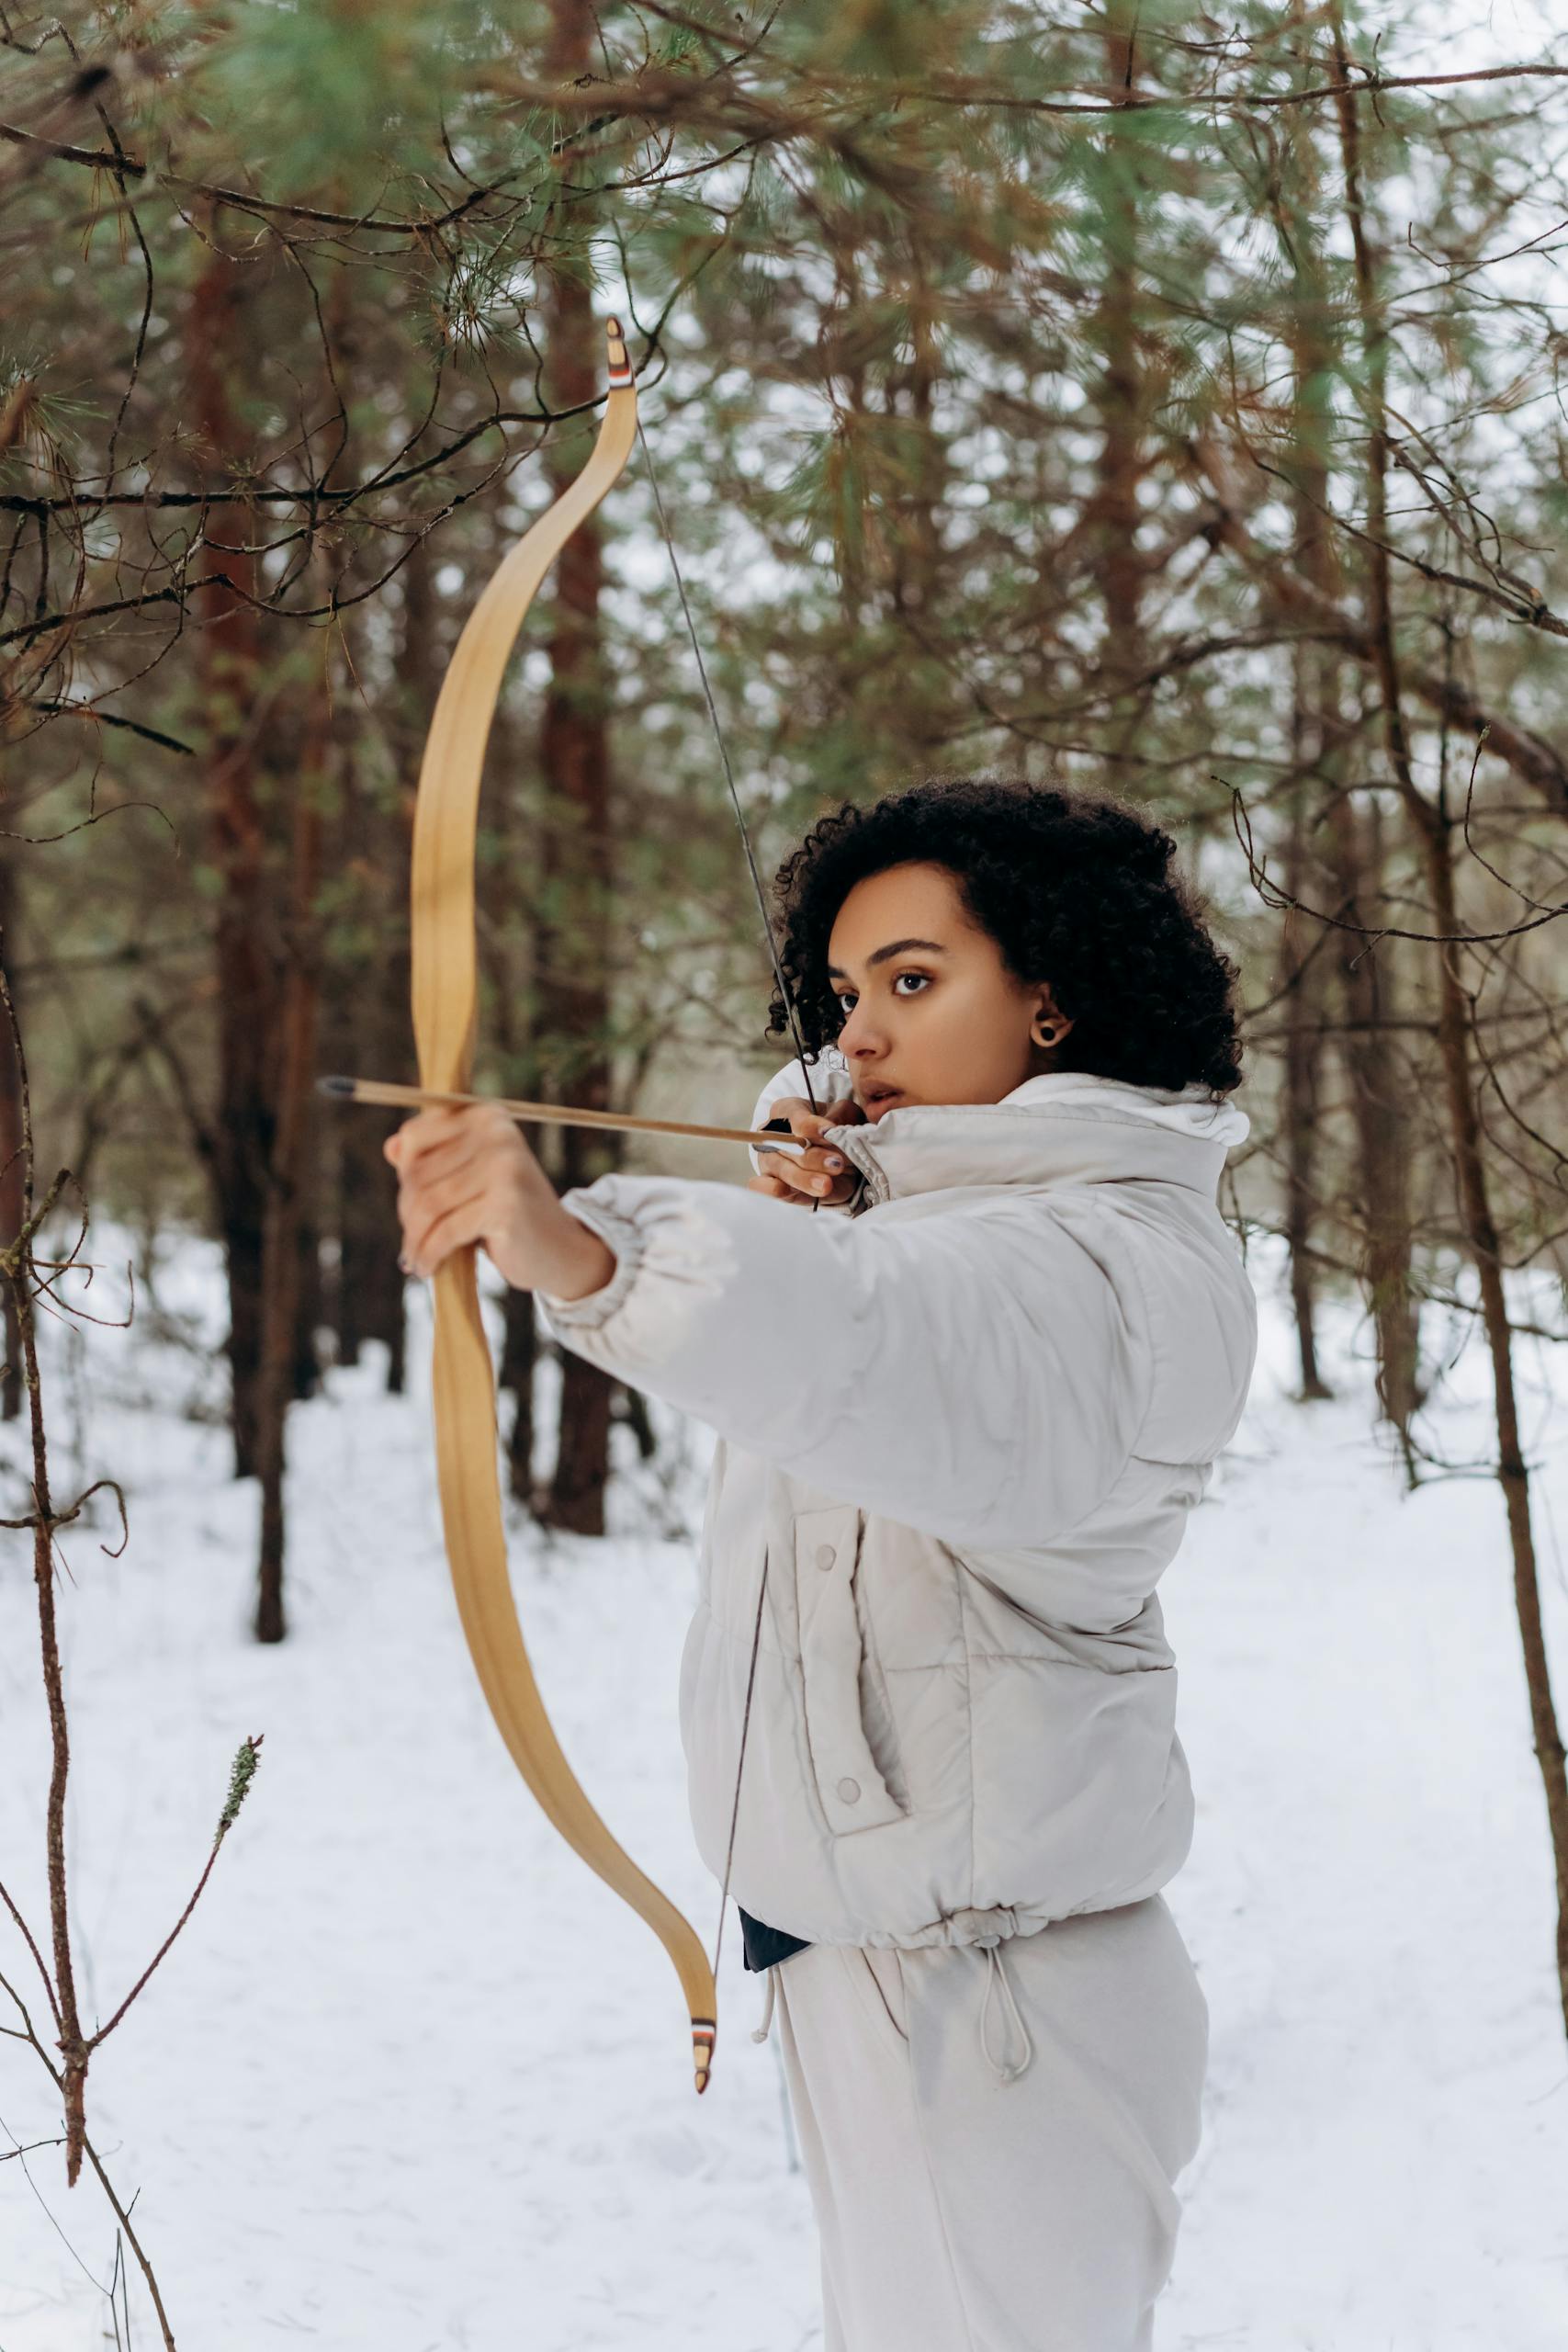 Woman in Gray Jacket Shooting a Bow and Arrow